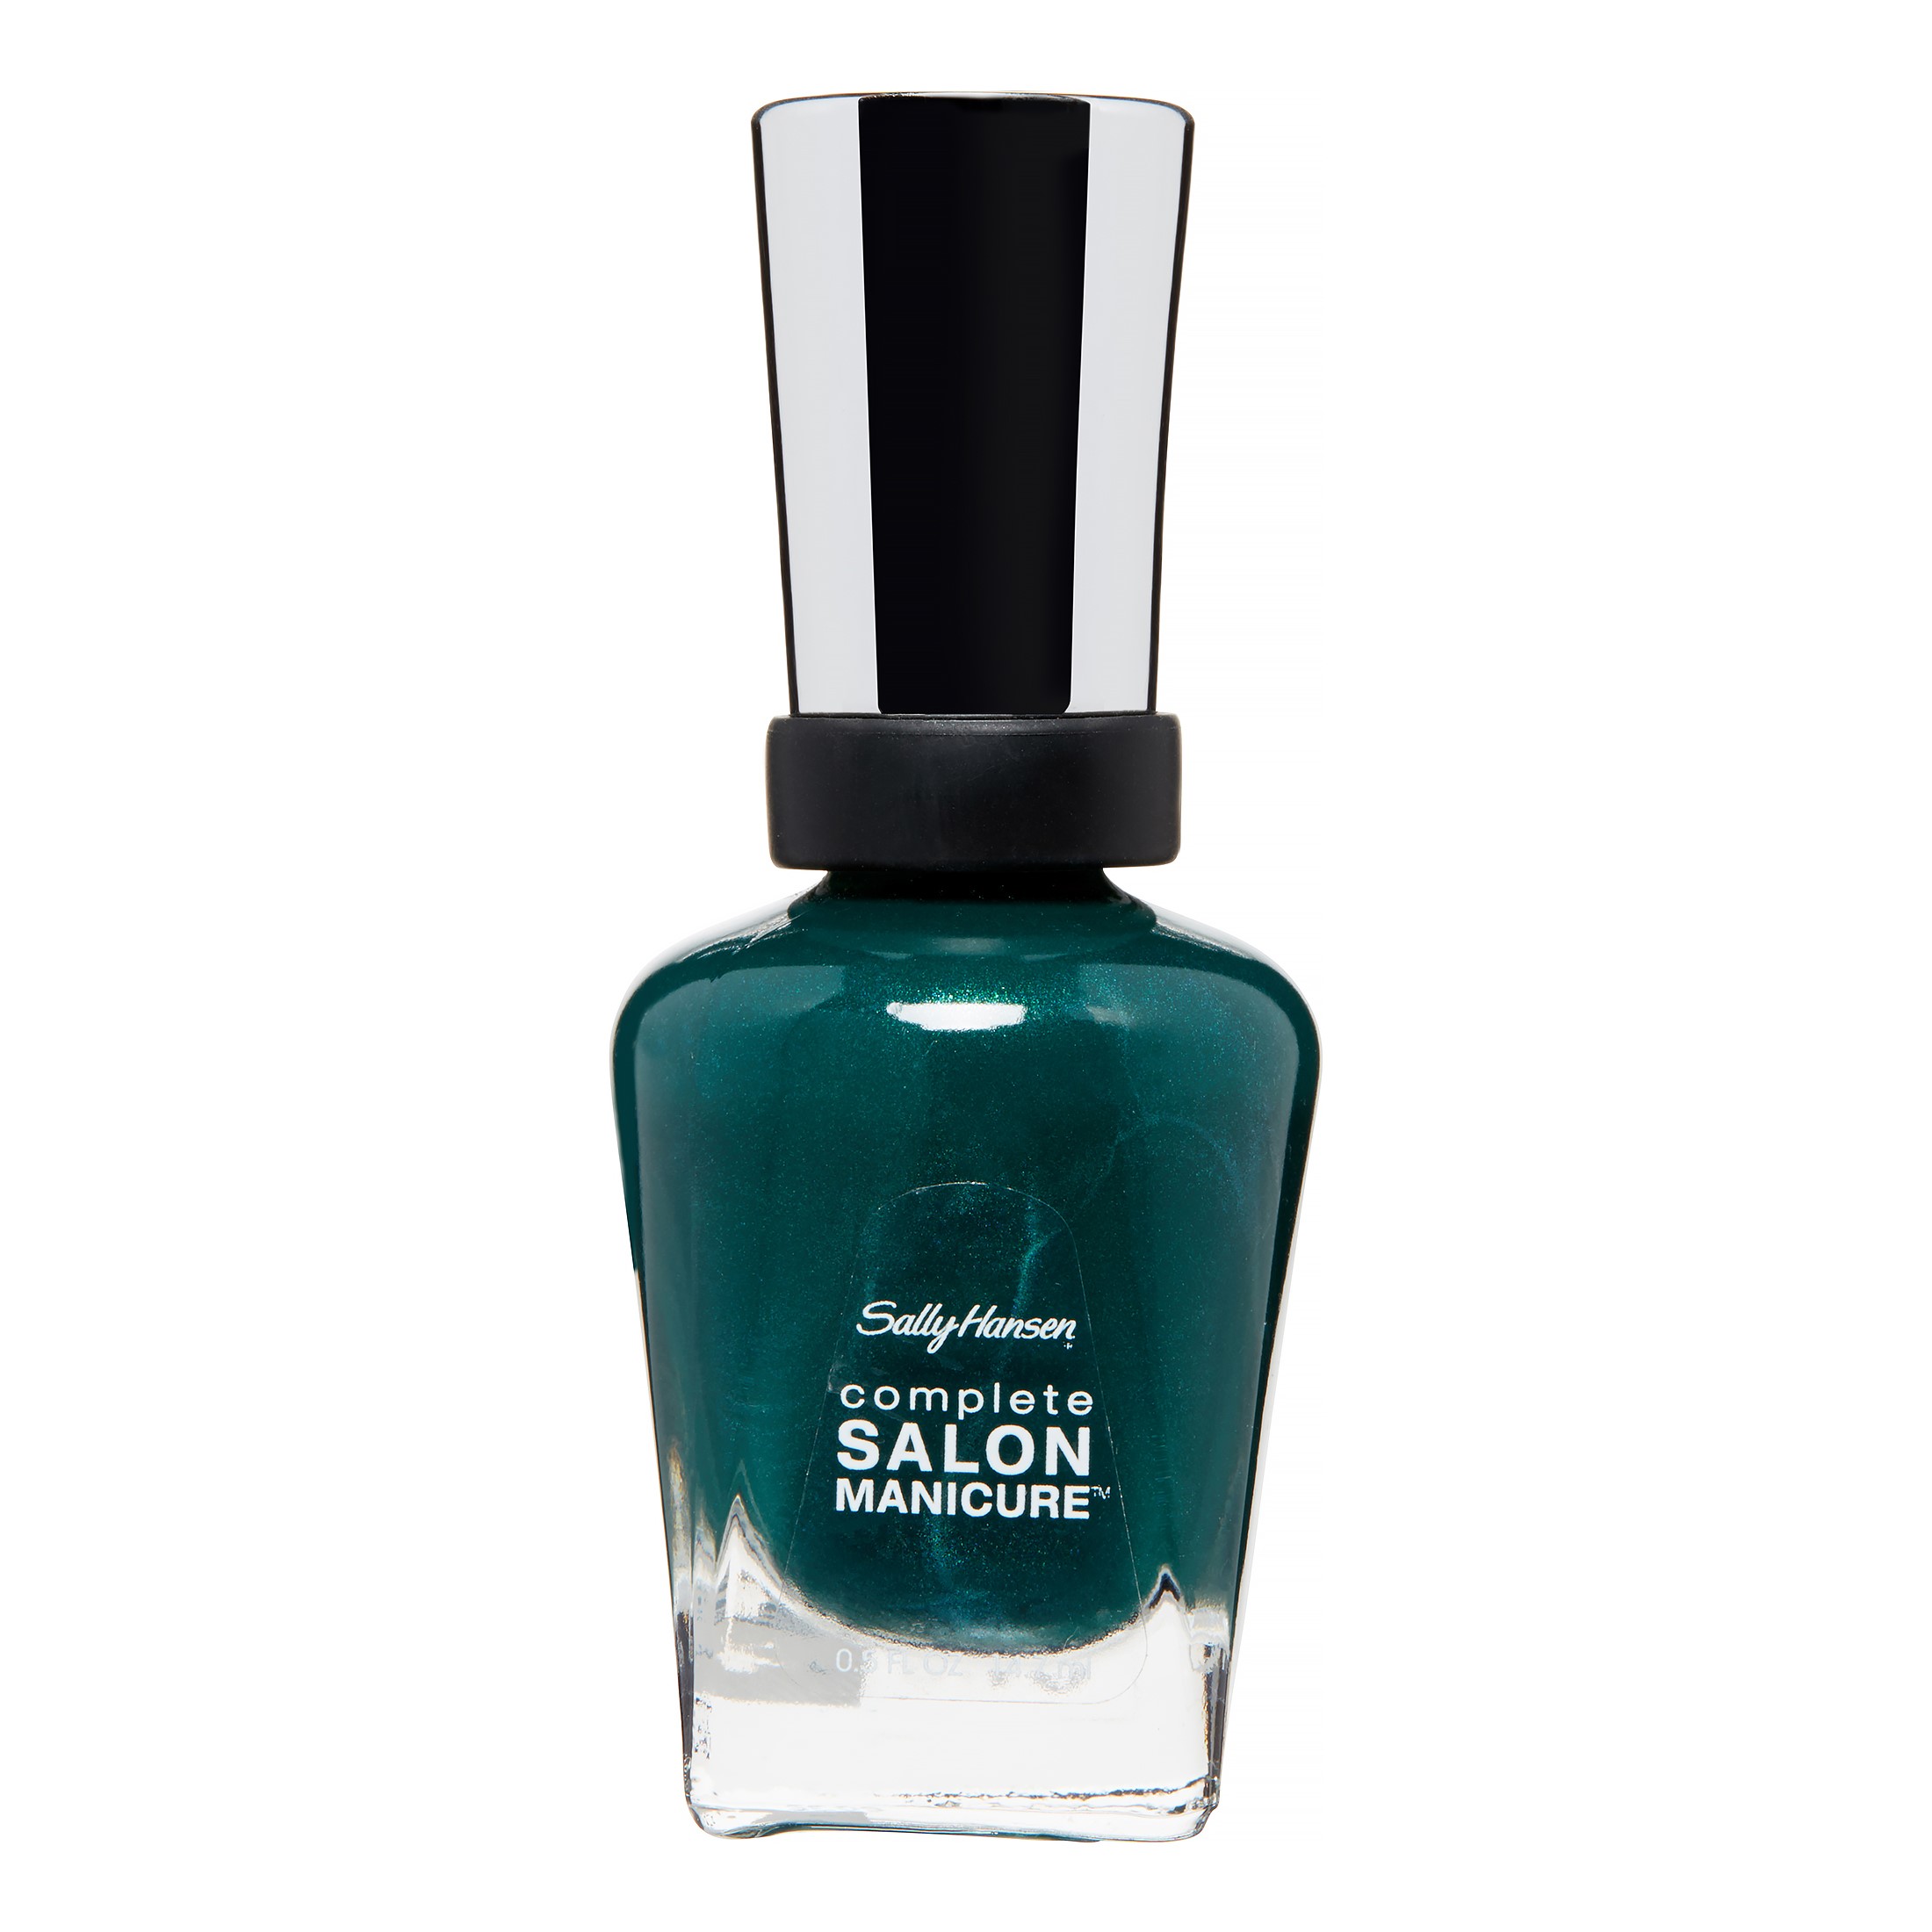 Sally Hansen Complete Salon Manicure Nail Polish, On Pine and Needles - image 1 of 3